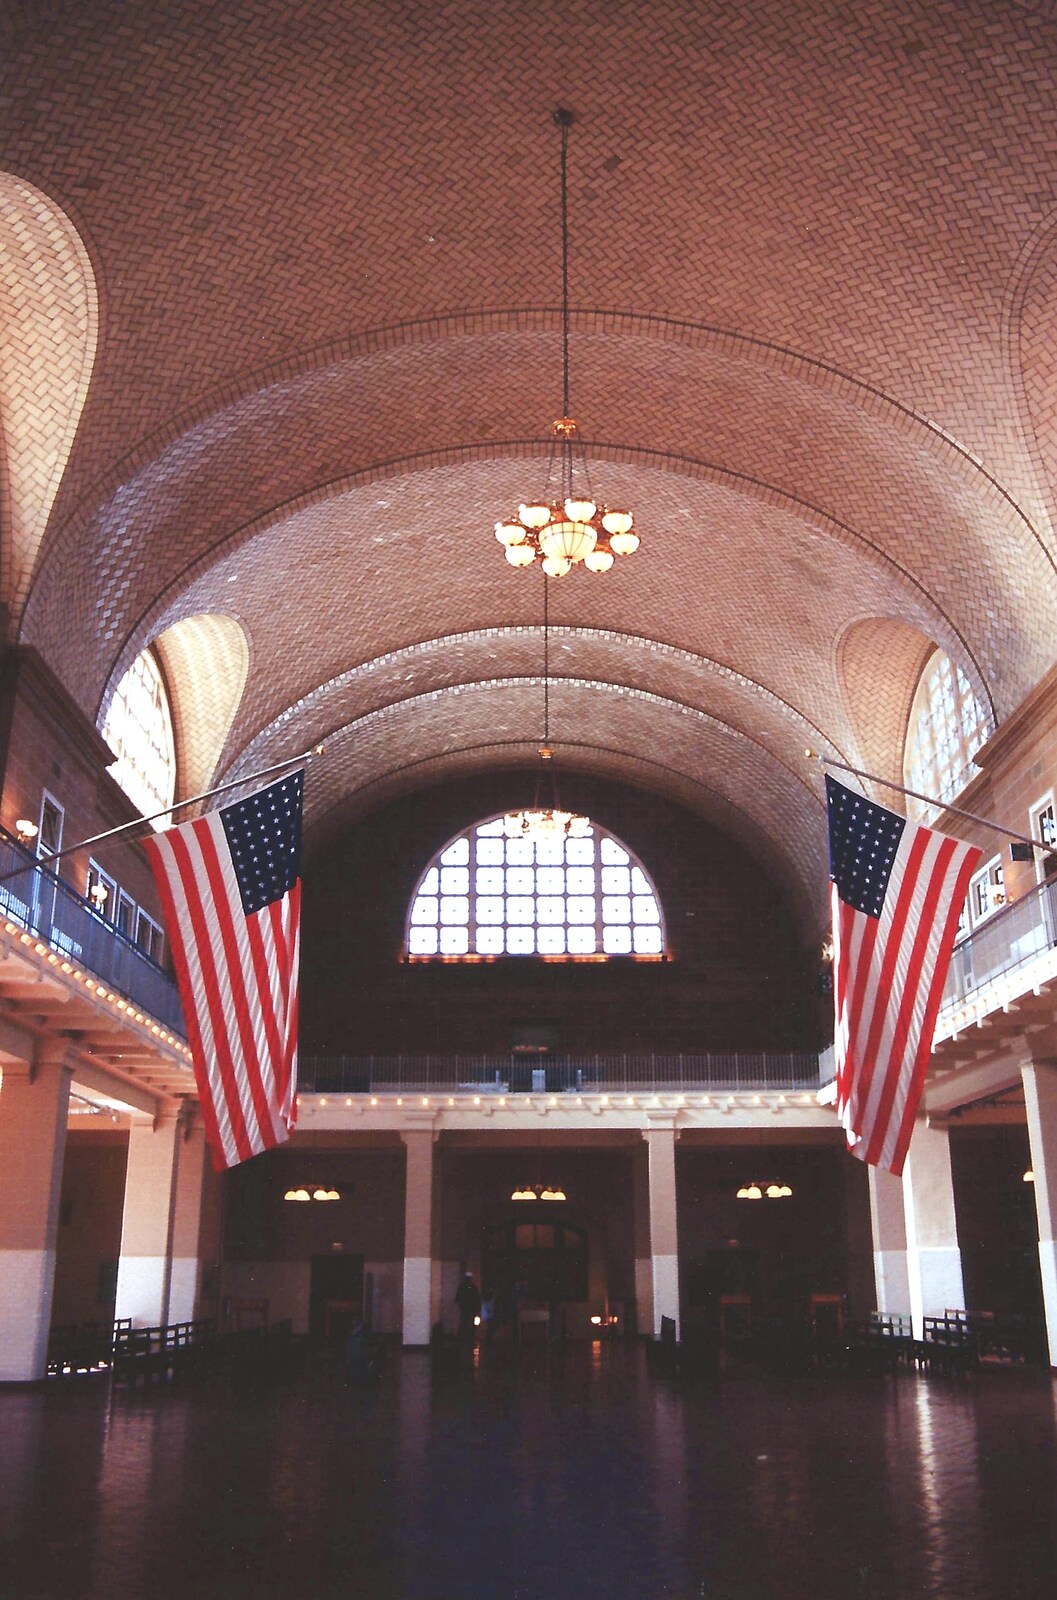 Grand Central Station from A Trip to New York, New York, USA - 11th March 1995